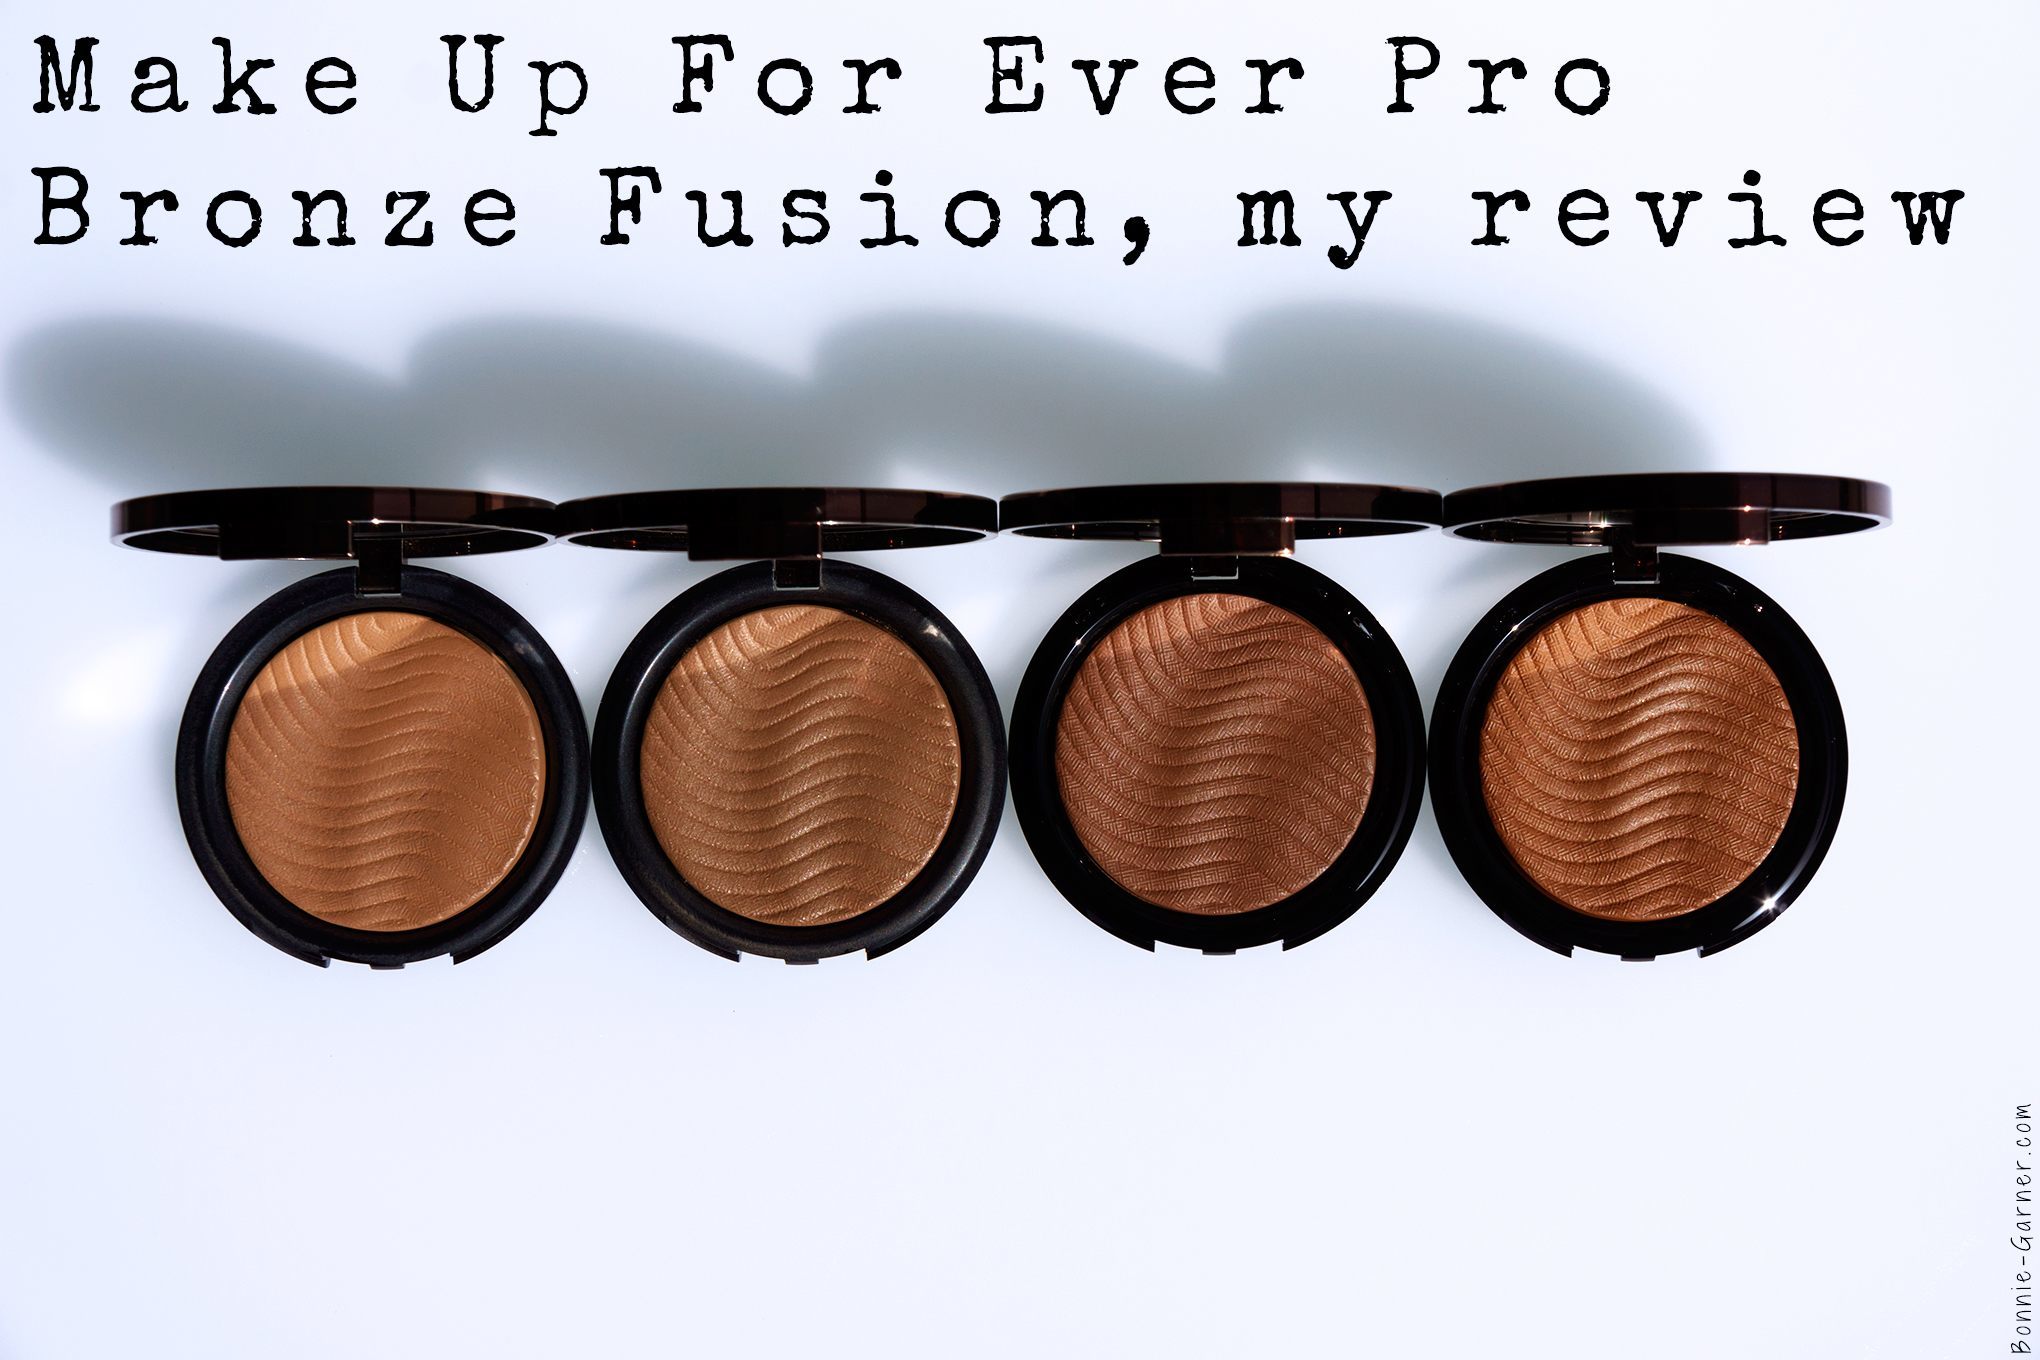 Make Up For Ever Pro Bronze Fusion, my review